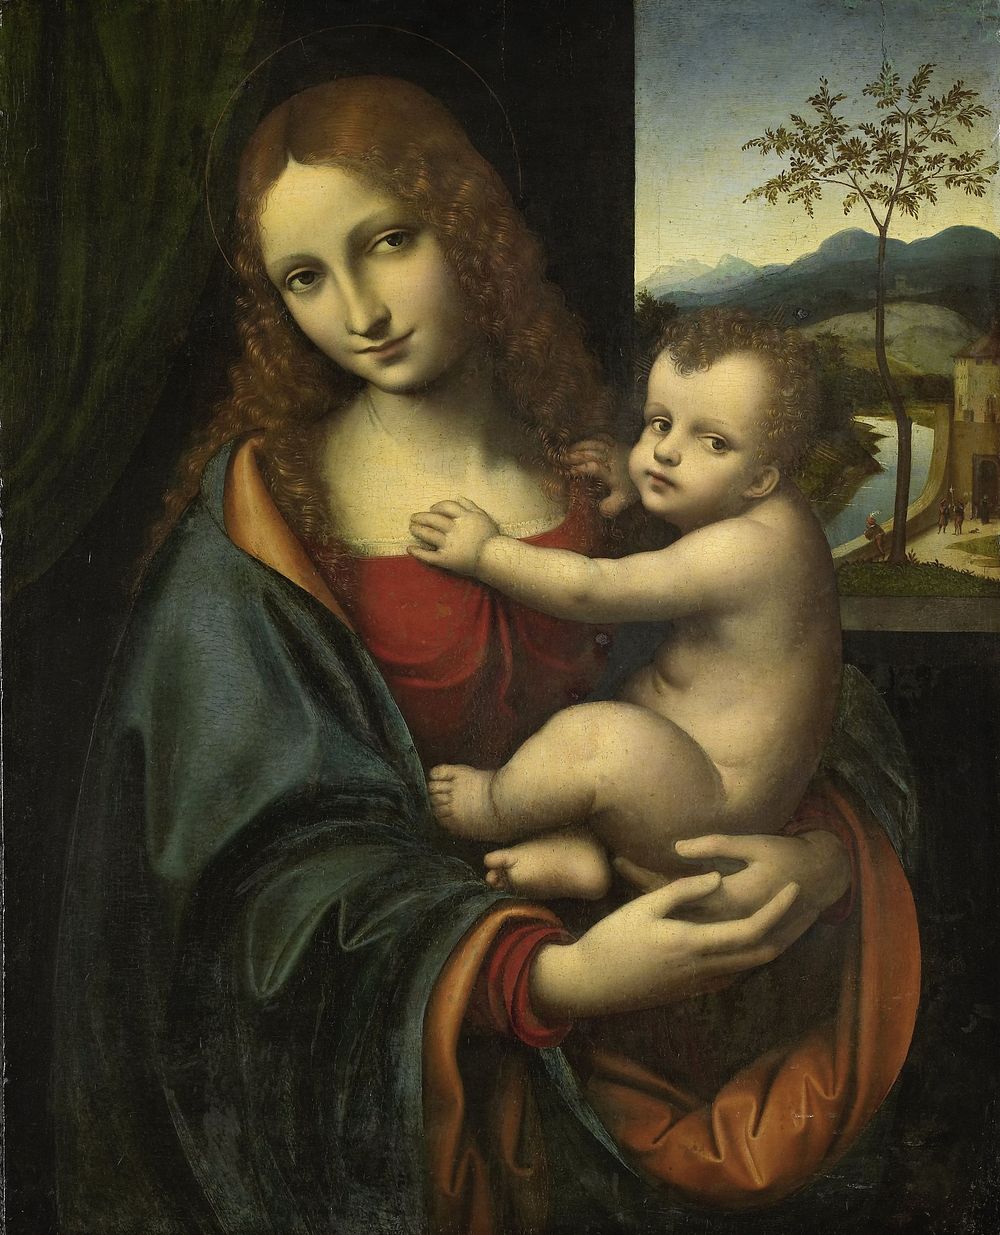 Madonna and Child (1510 - 1525) by Giampetrino